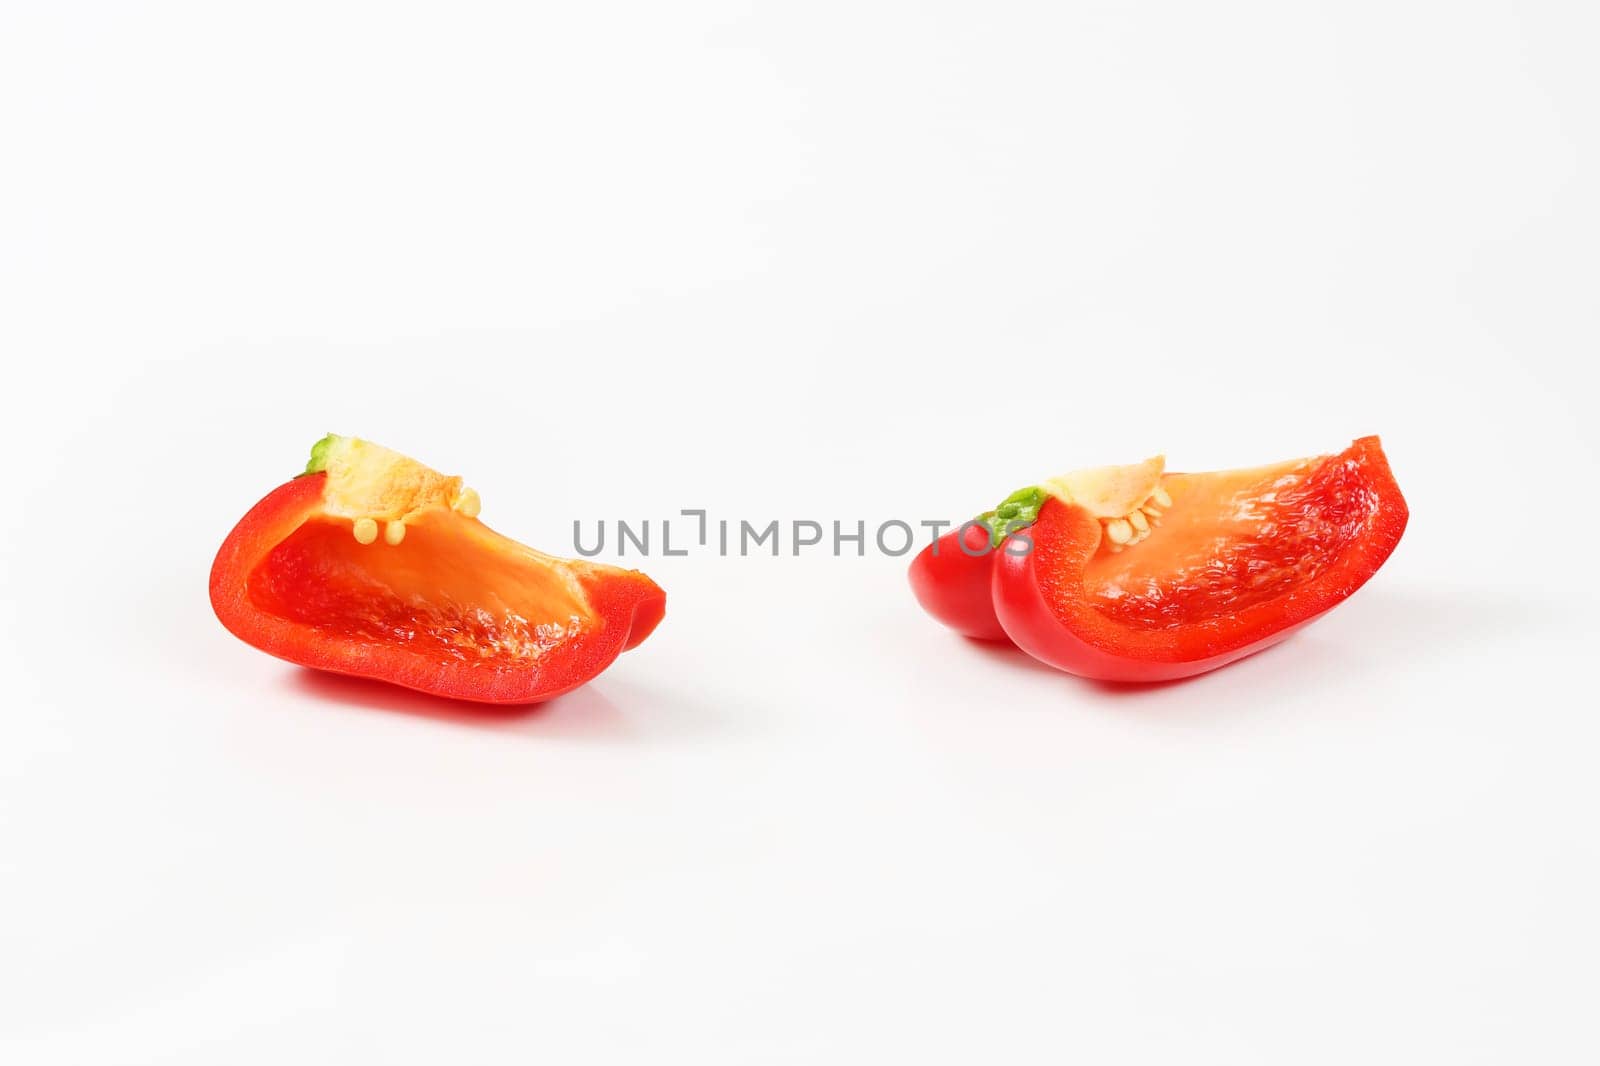 Two red bell pepper quarters by Digifoodstock